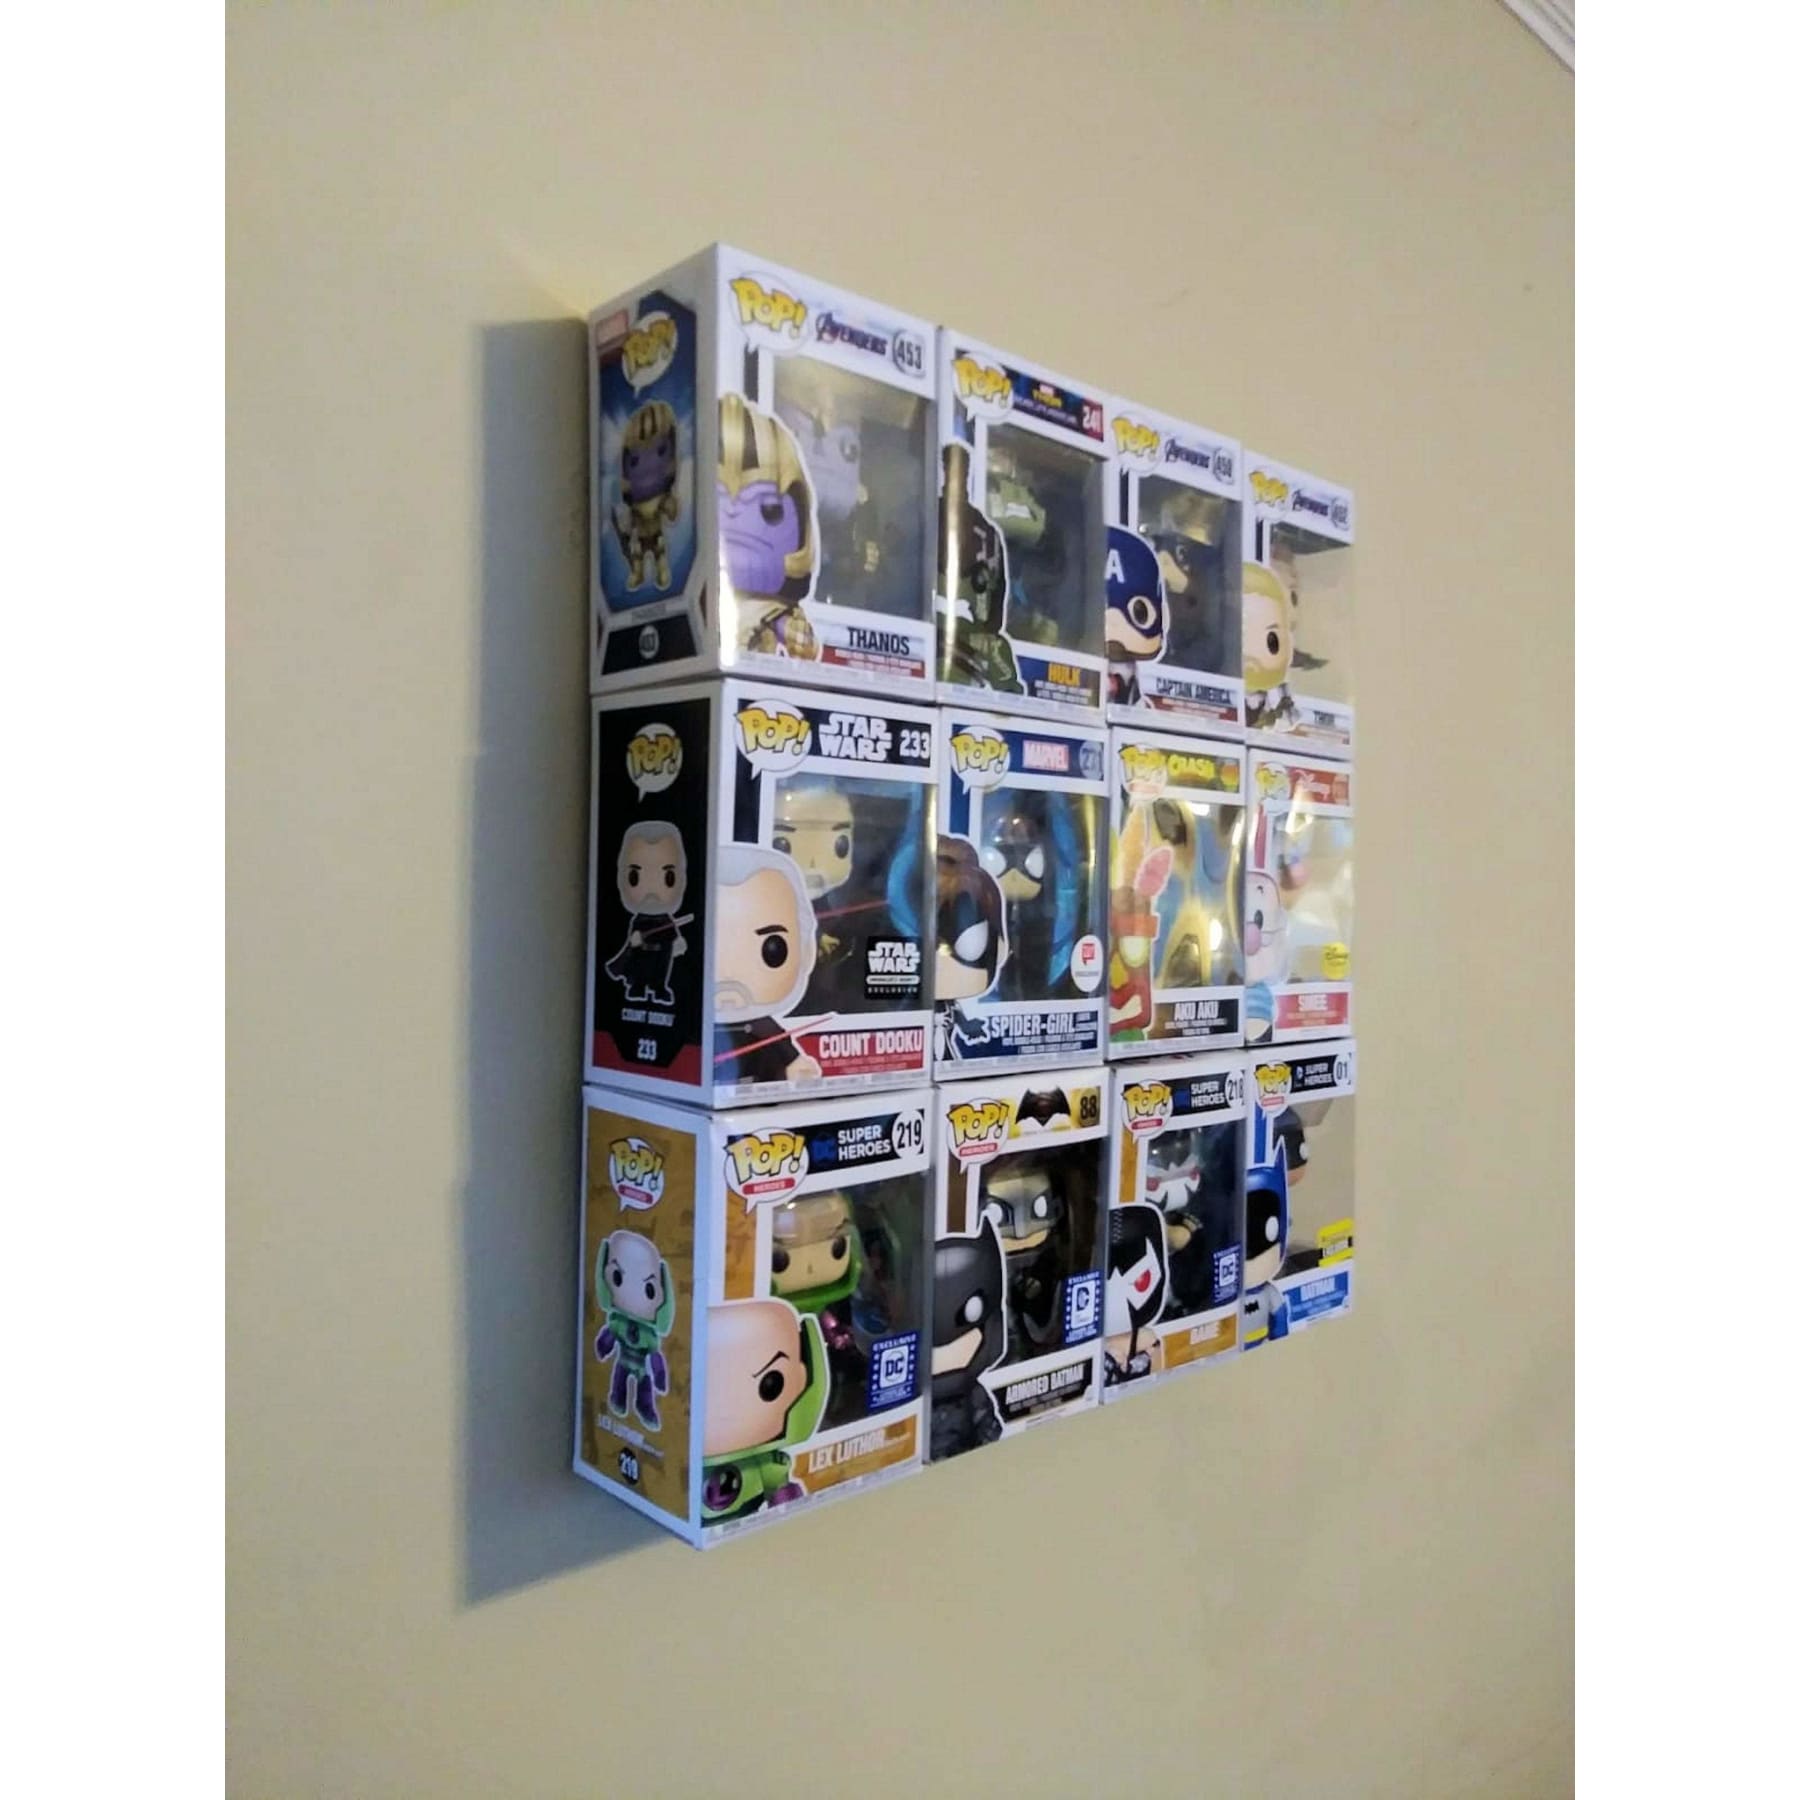 In Box Funko Pop or Funko Pin, Wall Display Case, Bordeless, Shelfless, No Assembly required, just hang on